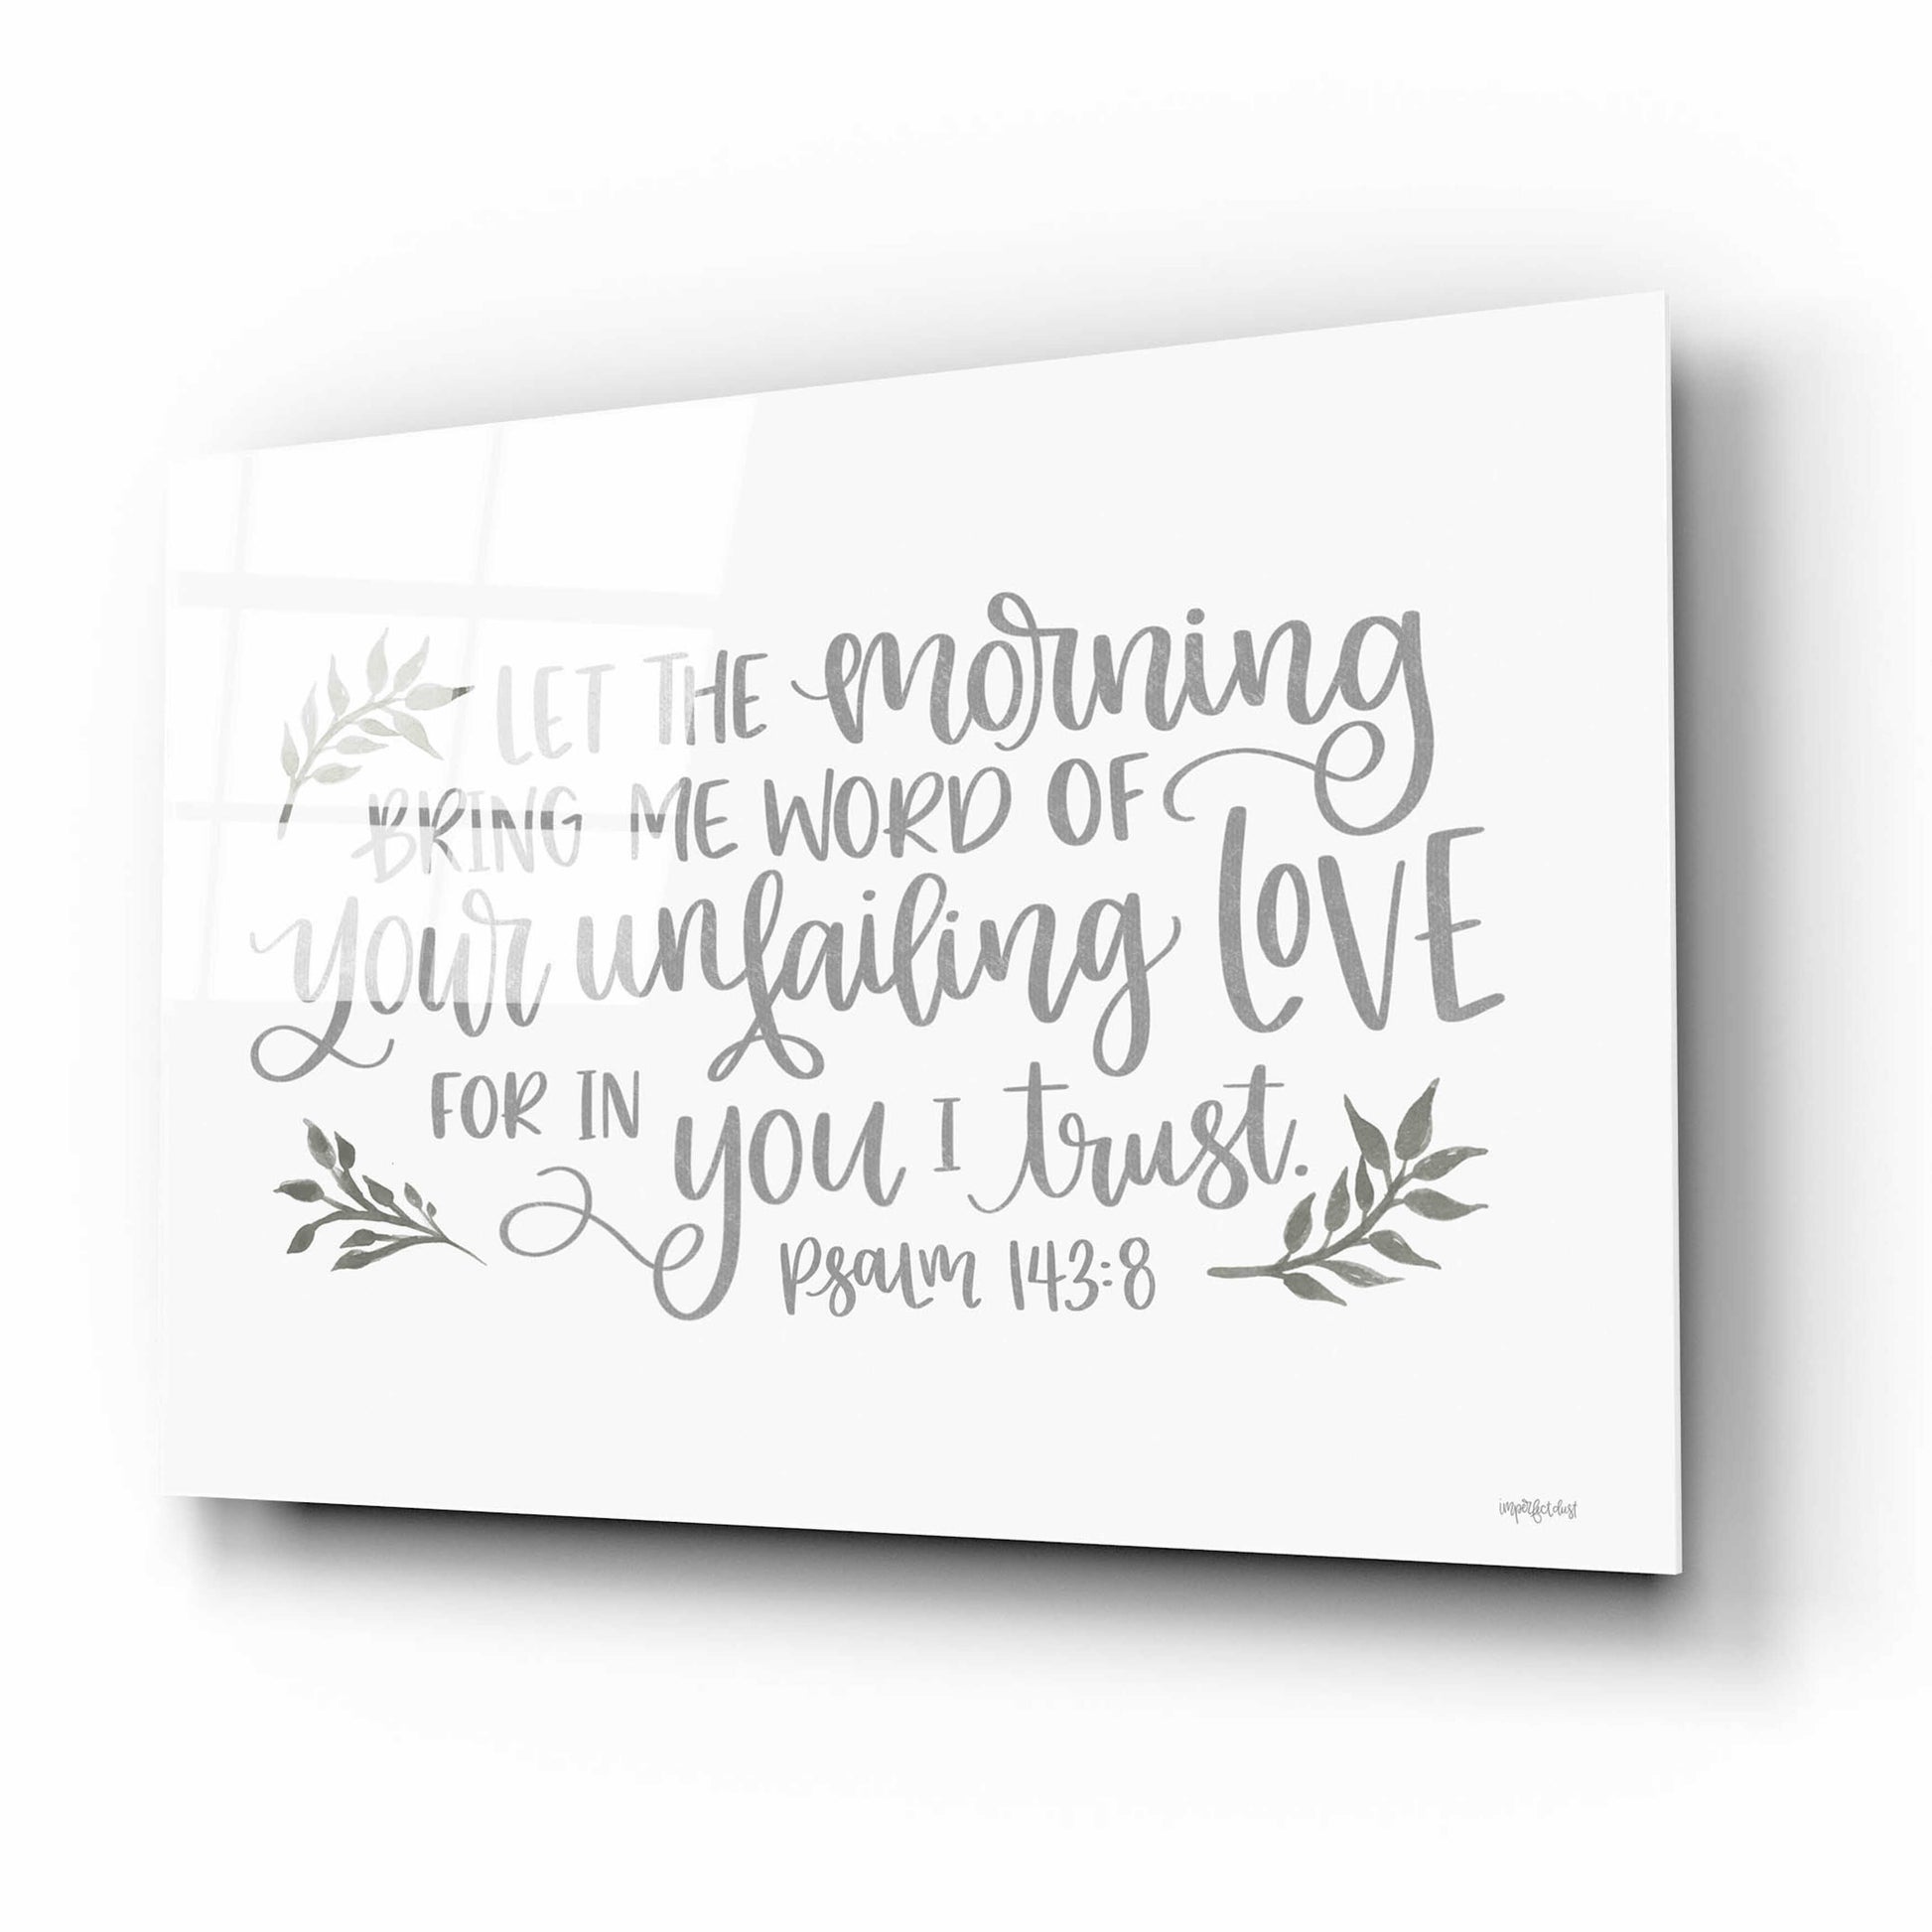 Epic Art 'Your Unfailing Love' by Imperfect Dust, Acrylic Glass Wall Art,16x12